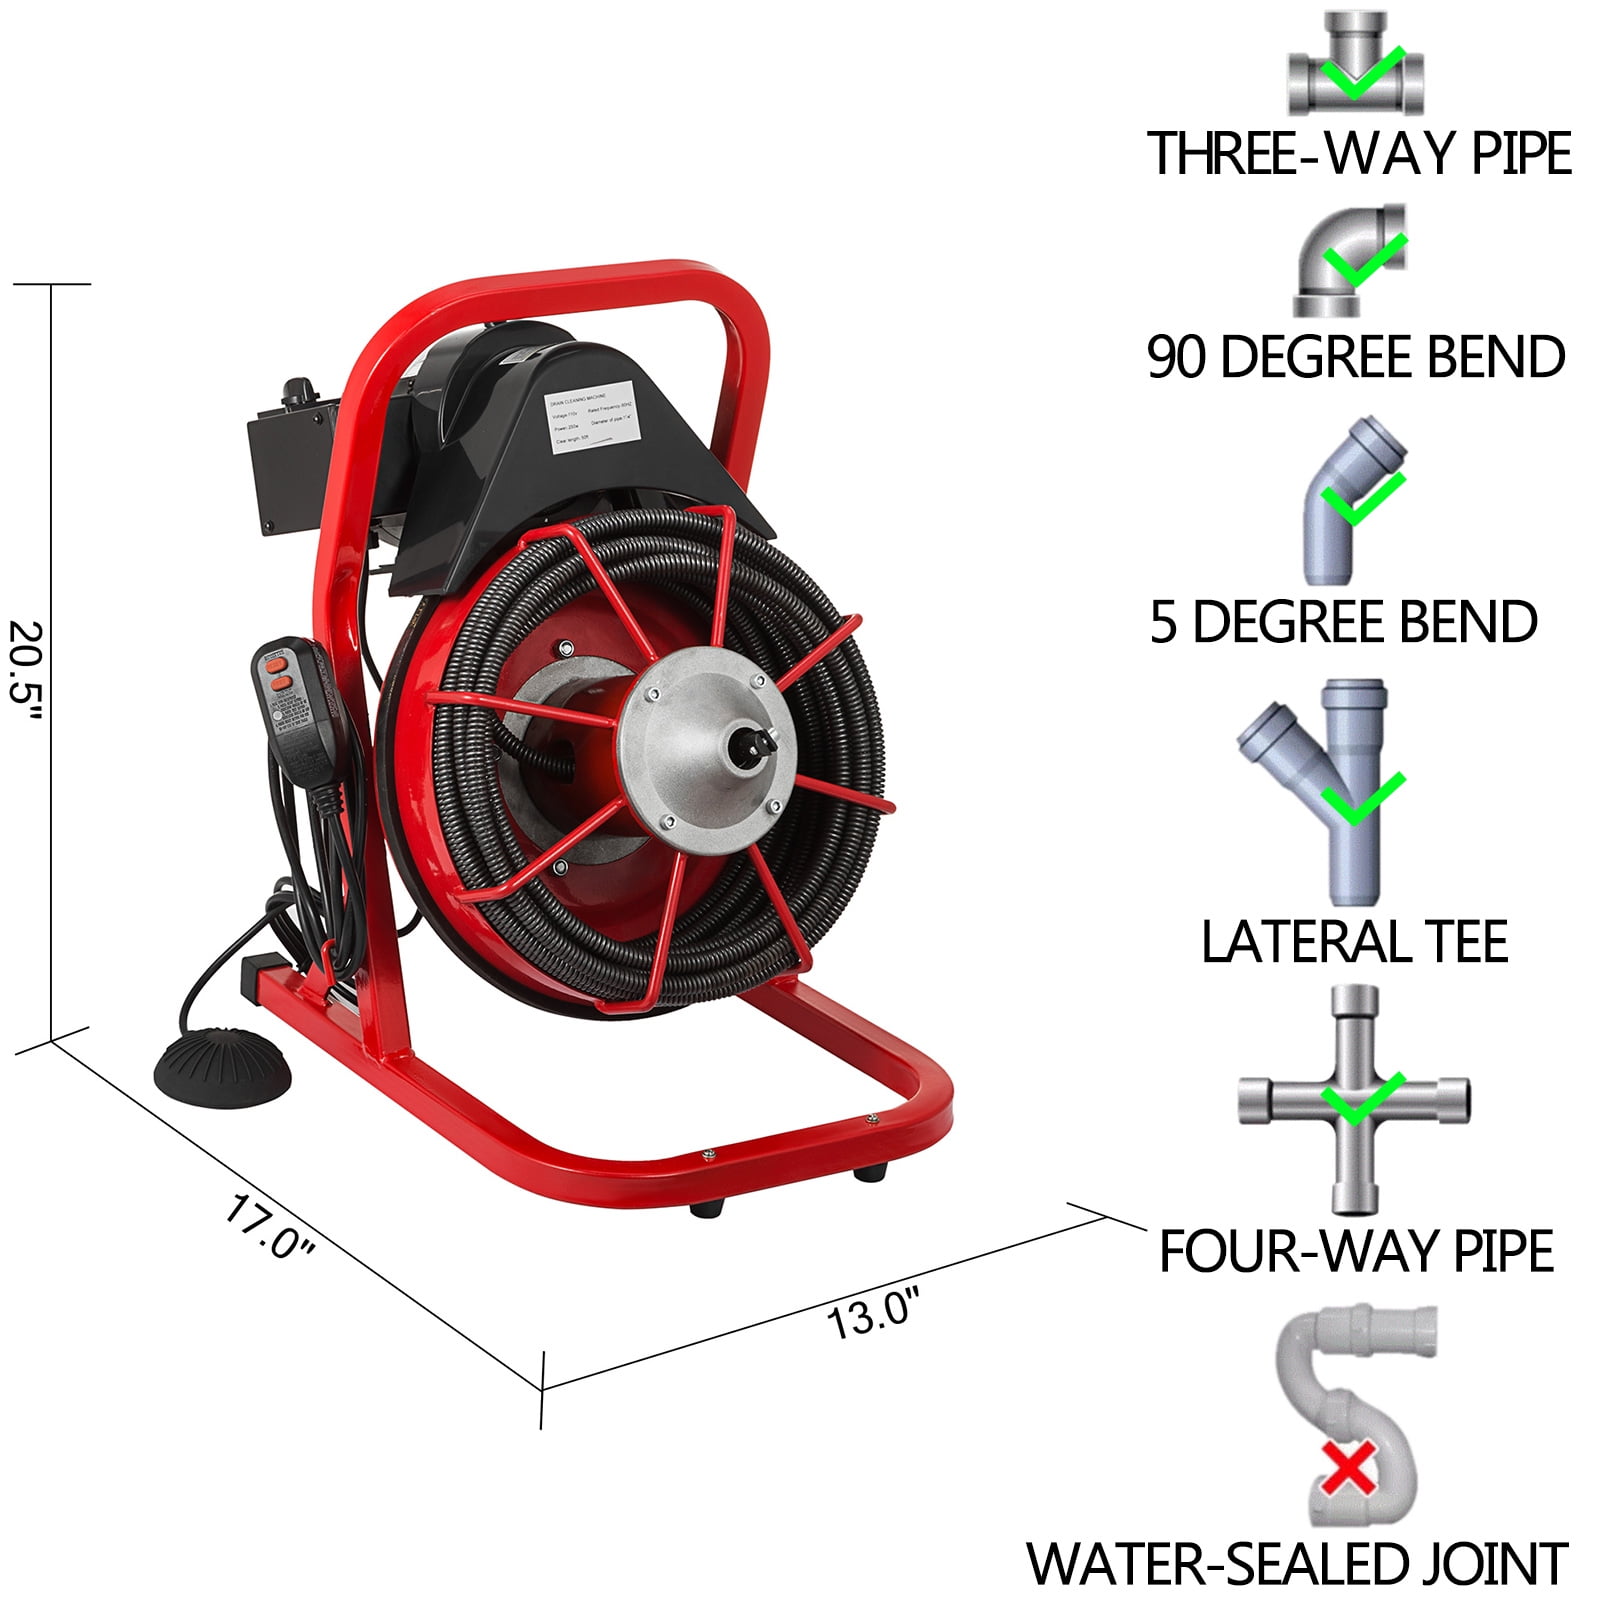 Vevorbrand Drain Cleaning Machine 75ft x 3/8 in Drain Cleaner Machines 250W Electric Drain Auger for 1 inch to 4 inch Pipes Electric Drain Snake Sewer